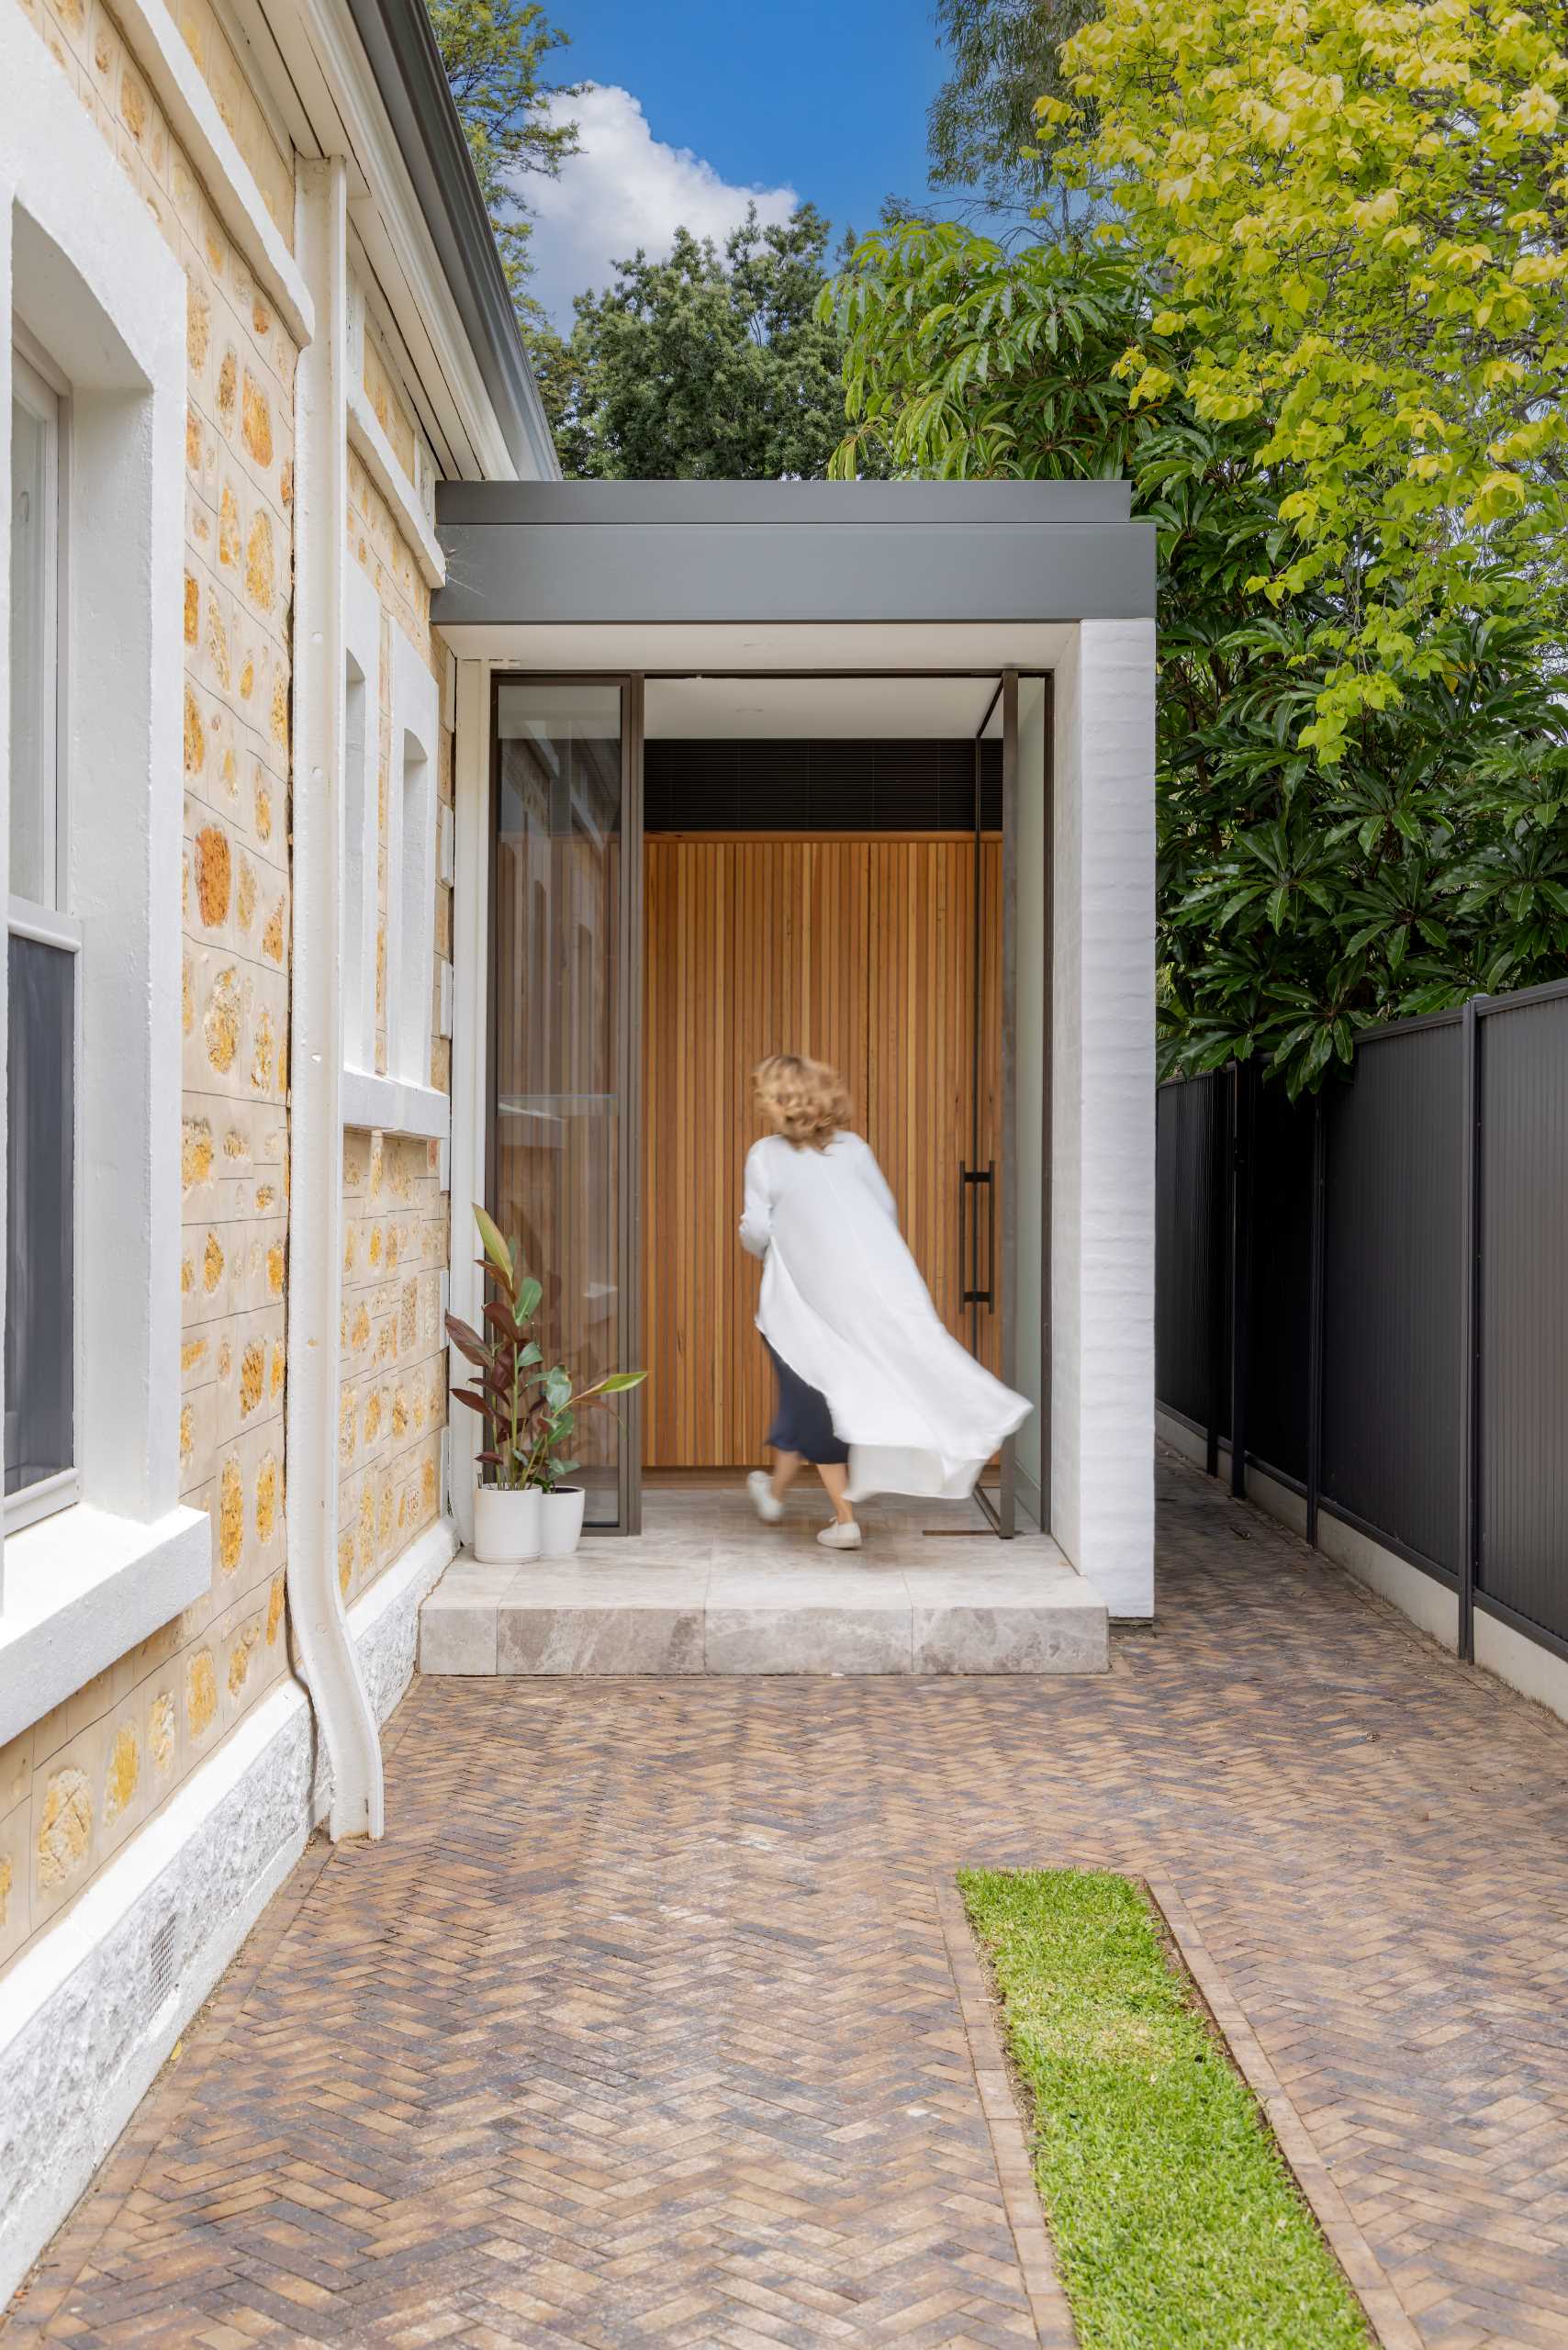 The extension can be accessed through the front door of the home, or via a side door off the driveway.